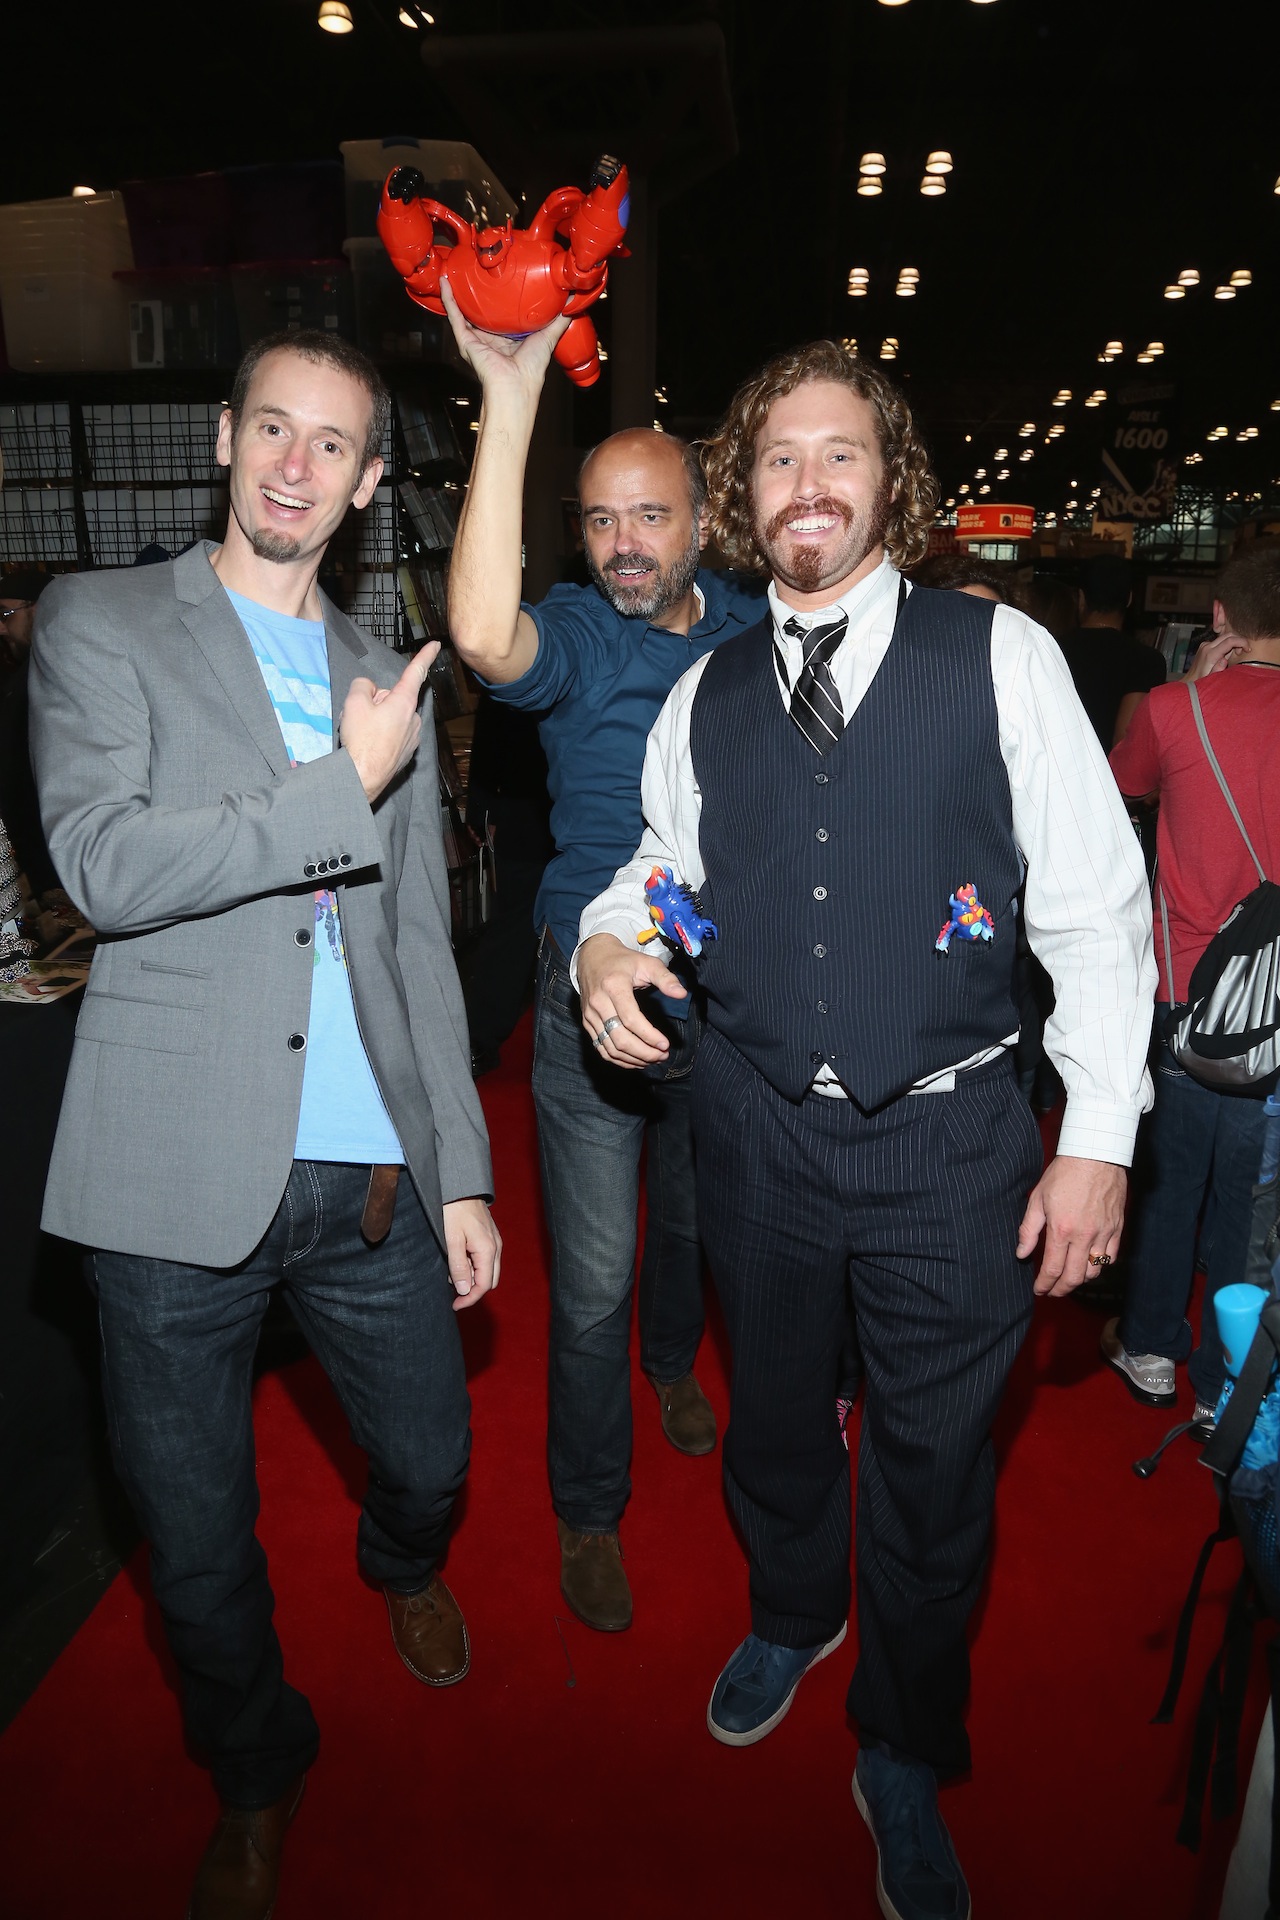 NEW YORK, NY - OCTOBER 09:  (L-R) Director Chris Williams, Scott Adsit, and T.J. Miller attend Walt Disney Studios' 2014 New York Comic Con presentations of "Big Hero 6" and "Tomorrowland" at the Javits Convention Center on Thursday October 9, 2014 in New York City.  (Photo by Jason Carter Rinaldi/Getty Images for Disney) *** Local Caption *** Chris Williams;Scott Adsit;TJ Miller